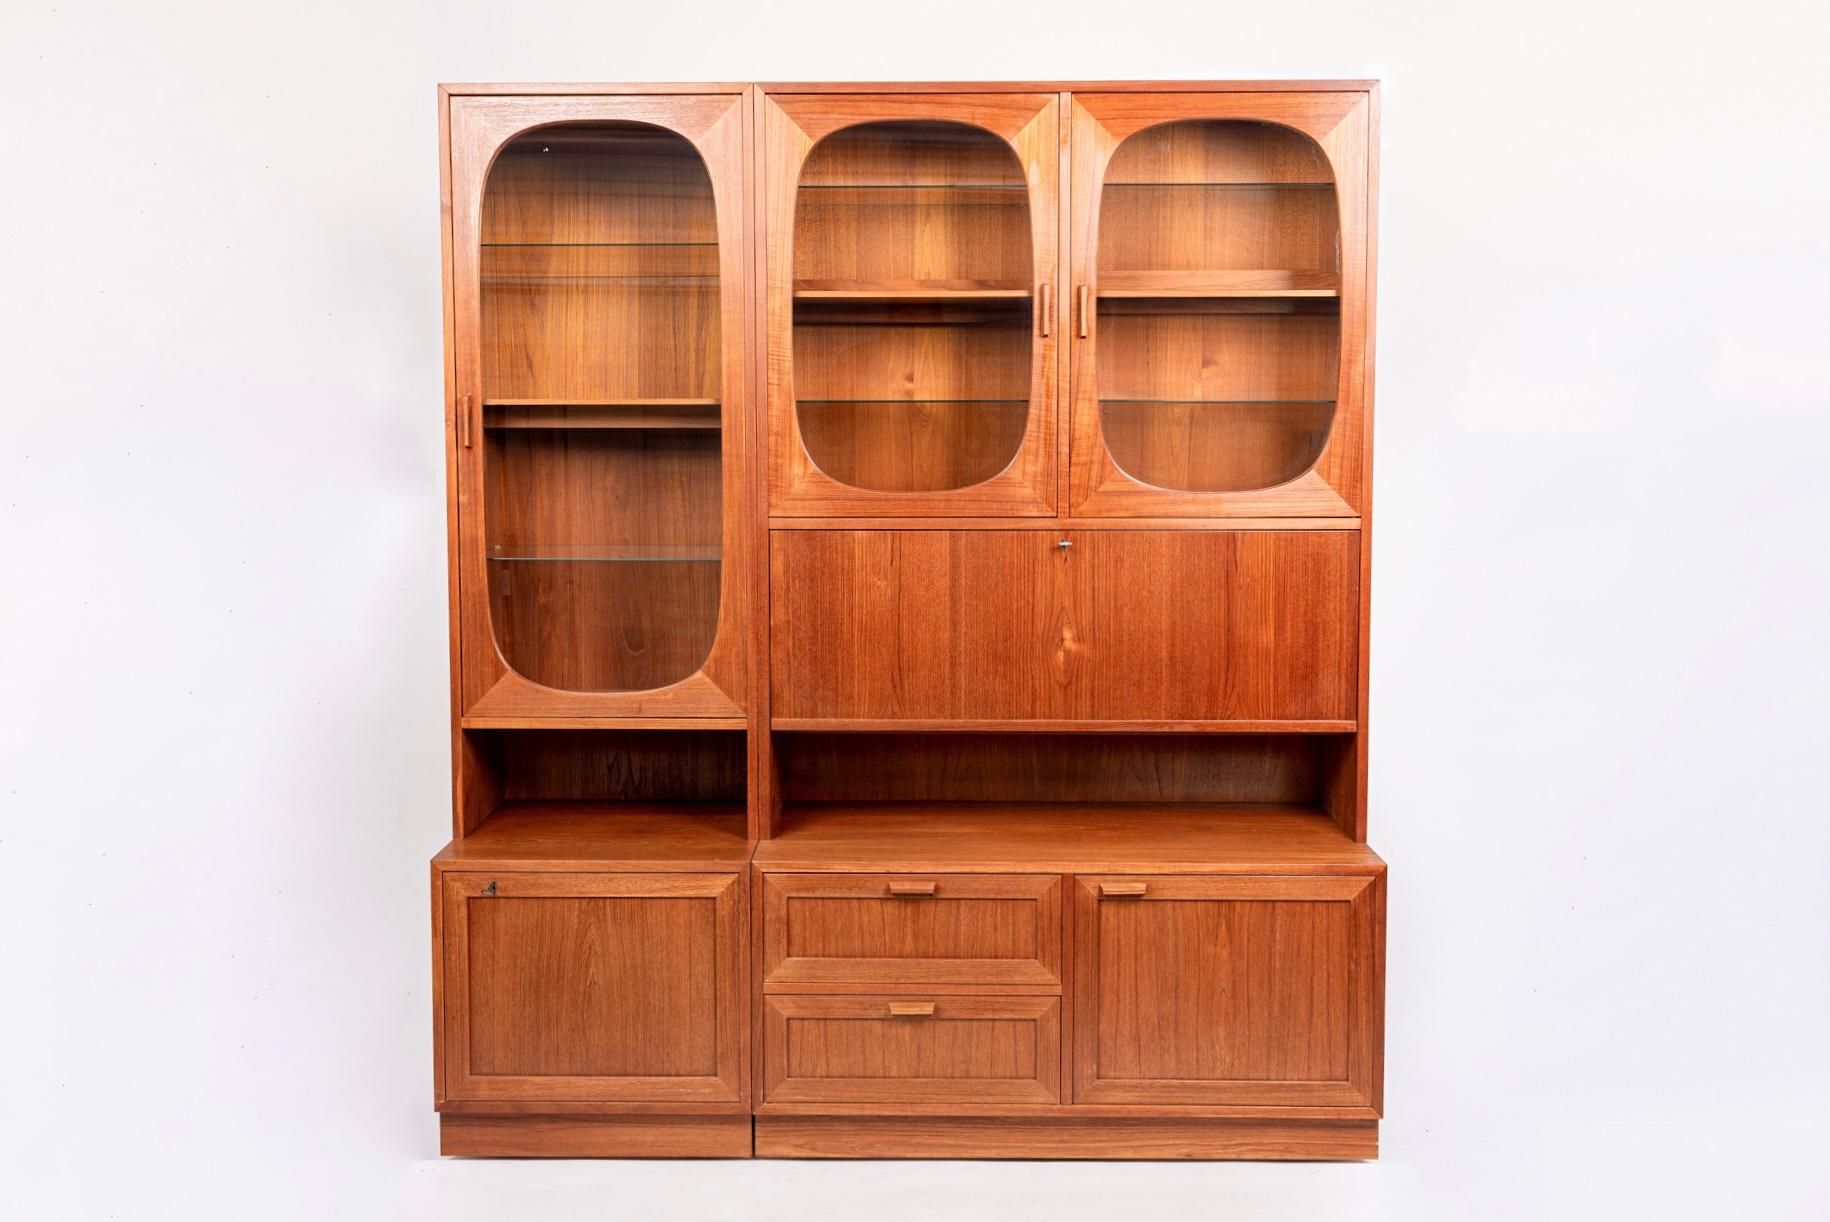 This exceptional set of matching vintage mid century Danish modern lighted display cabinets were made by Sejling Skabe in Denmark circa 1960. The cabinets are impeccably crafted from teak wood and the minimalist Scandinavian modern design features